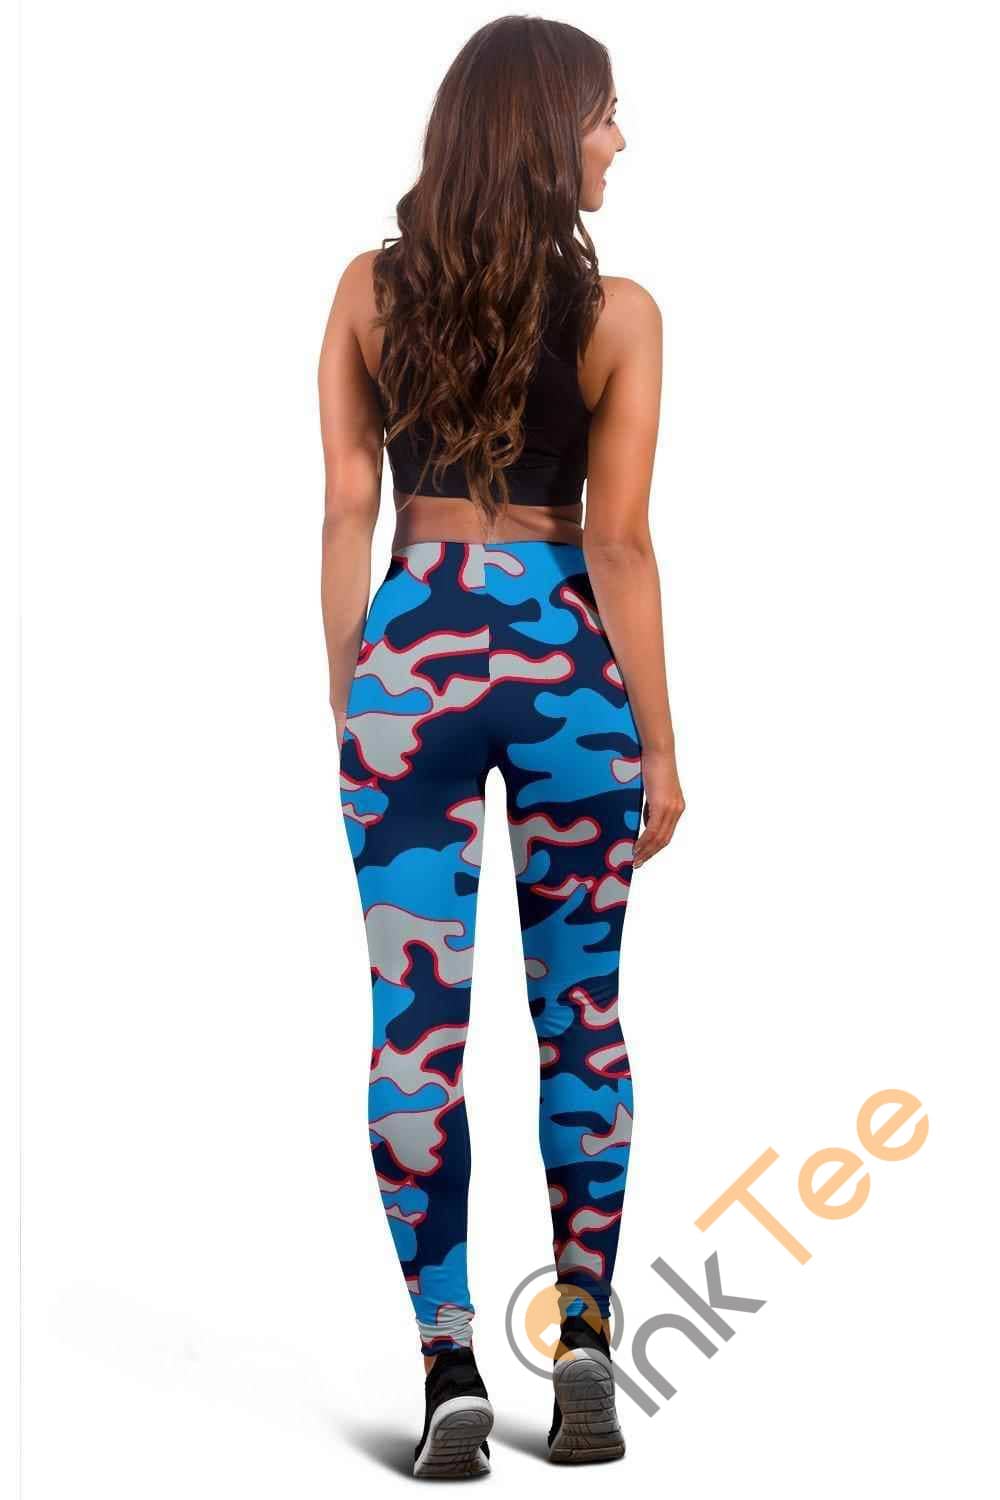 Inktee Store - Tennessee Titans Inspired Tru Camo 3D All Over Print For Yoga Fitness Fashion Women'S Leggings Image